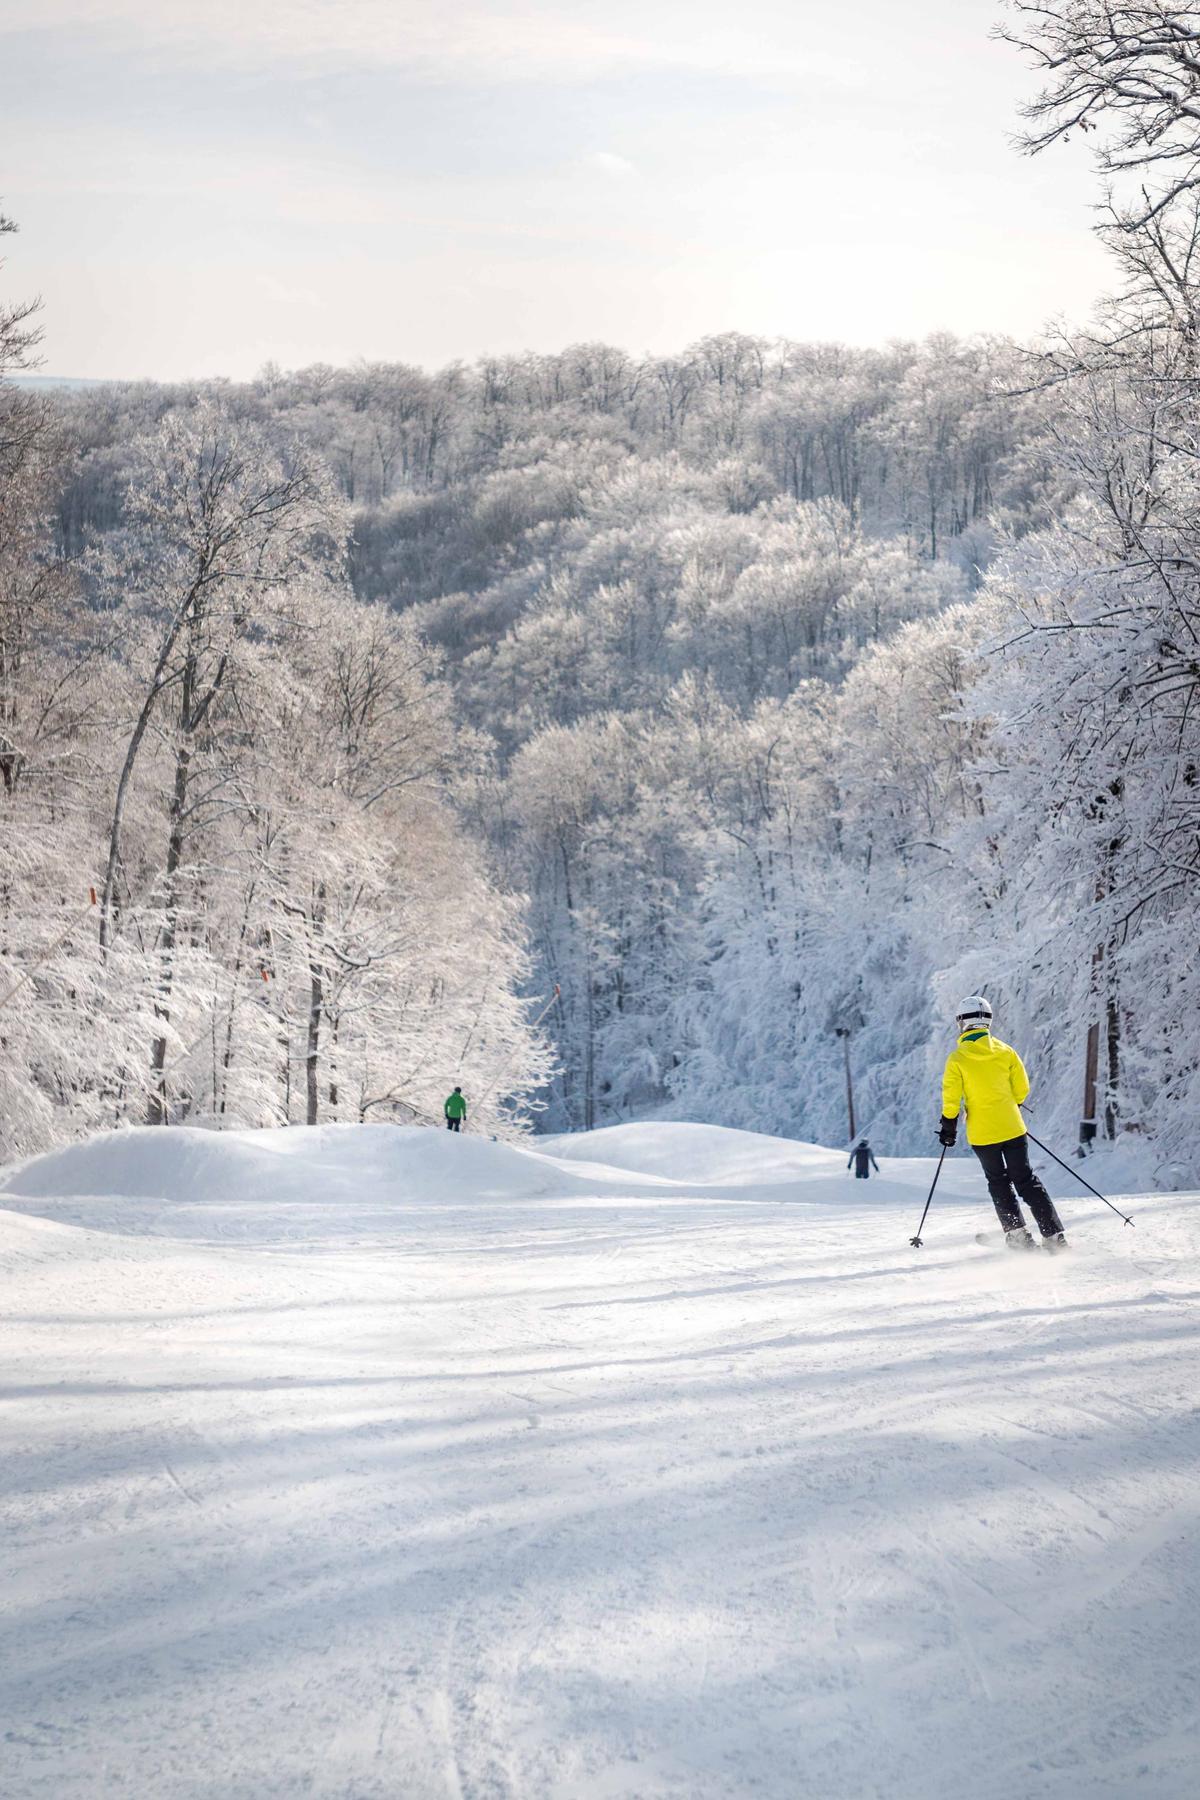 Writer and broadcaster Lowell Thomas referred to Ellicottville as “The Aspen of the East.” (Courtesy of Holiday Valley)